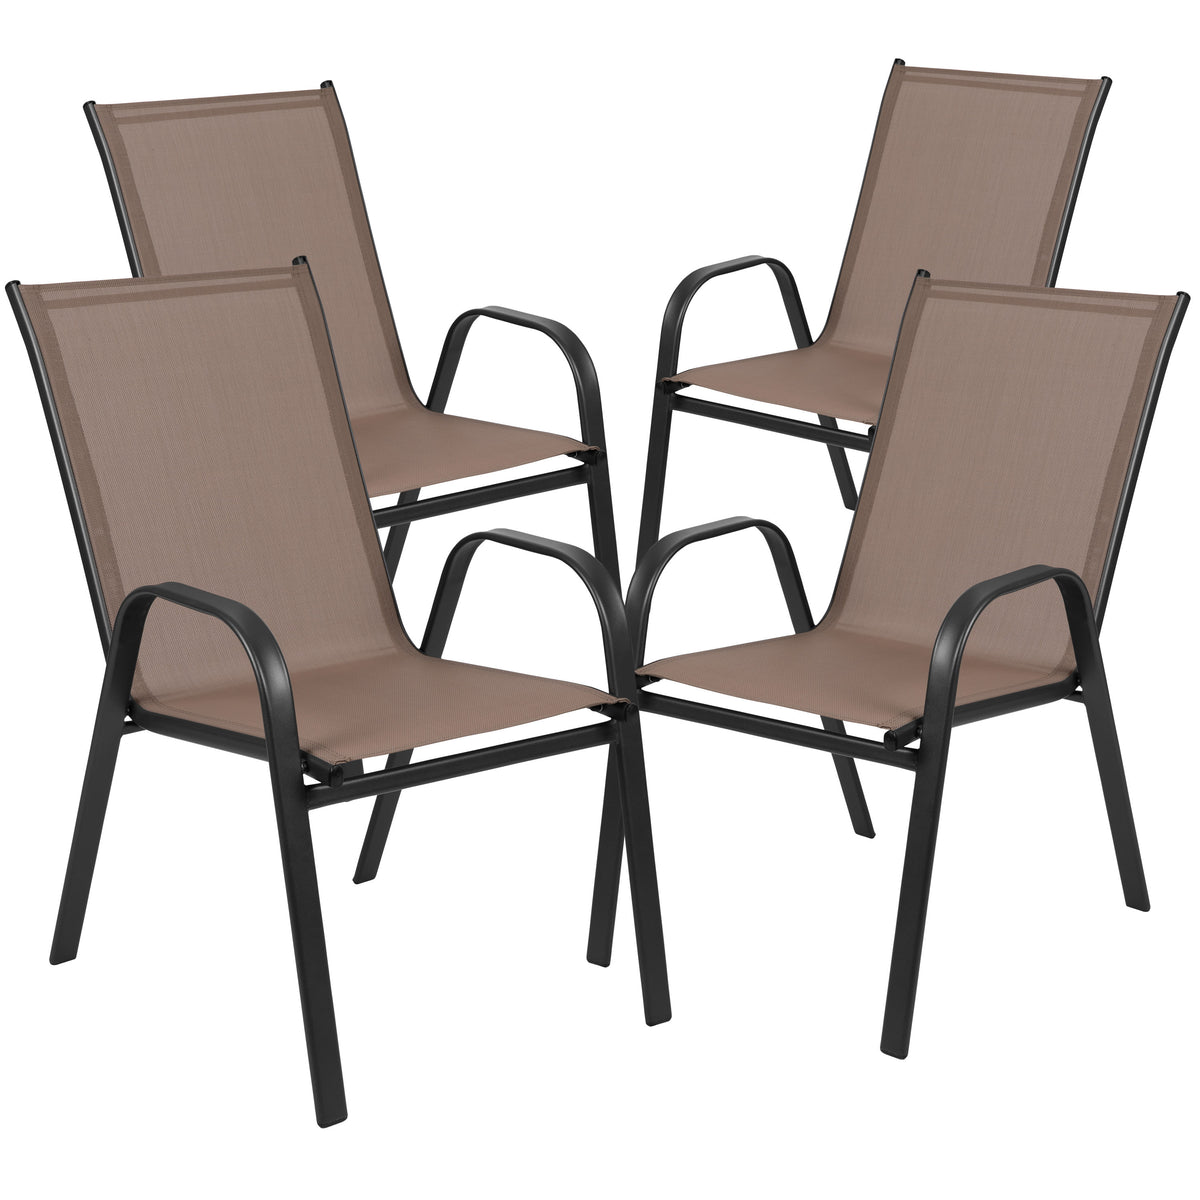 Brown |#| 7 Piece Patio Dining Set - 55inch Glass Patio Table, 6 Brown Flex Stack Chairs